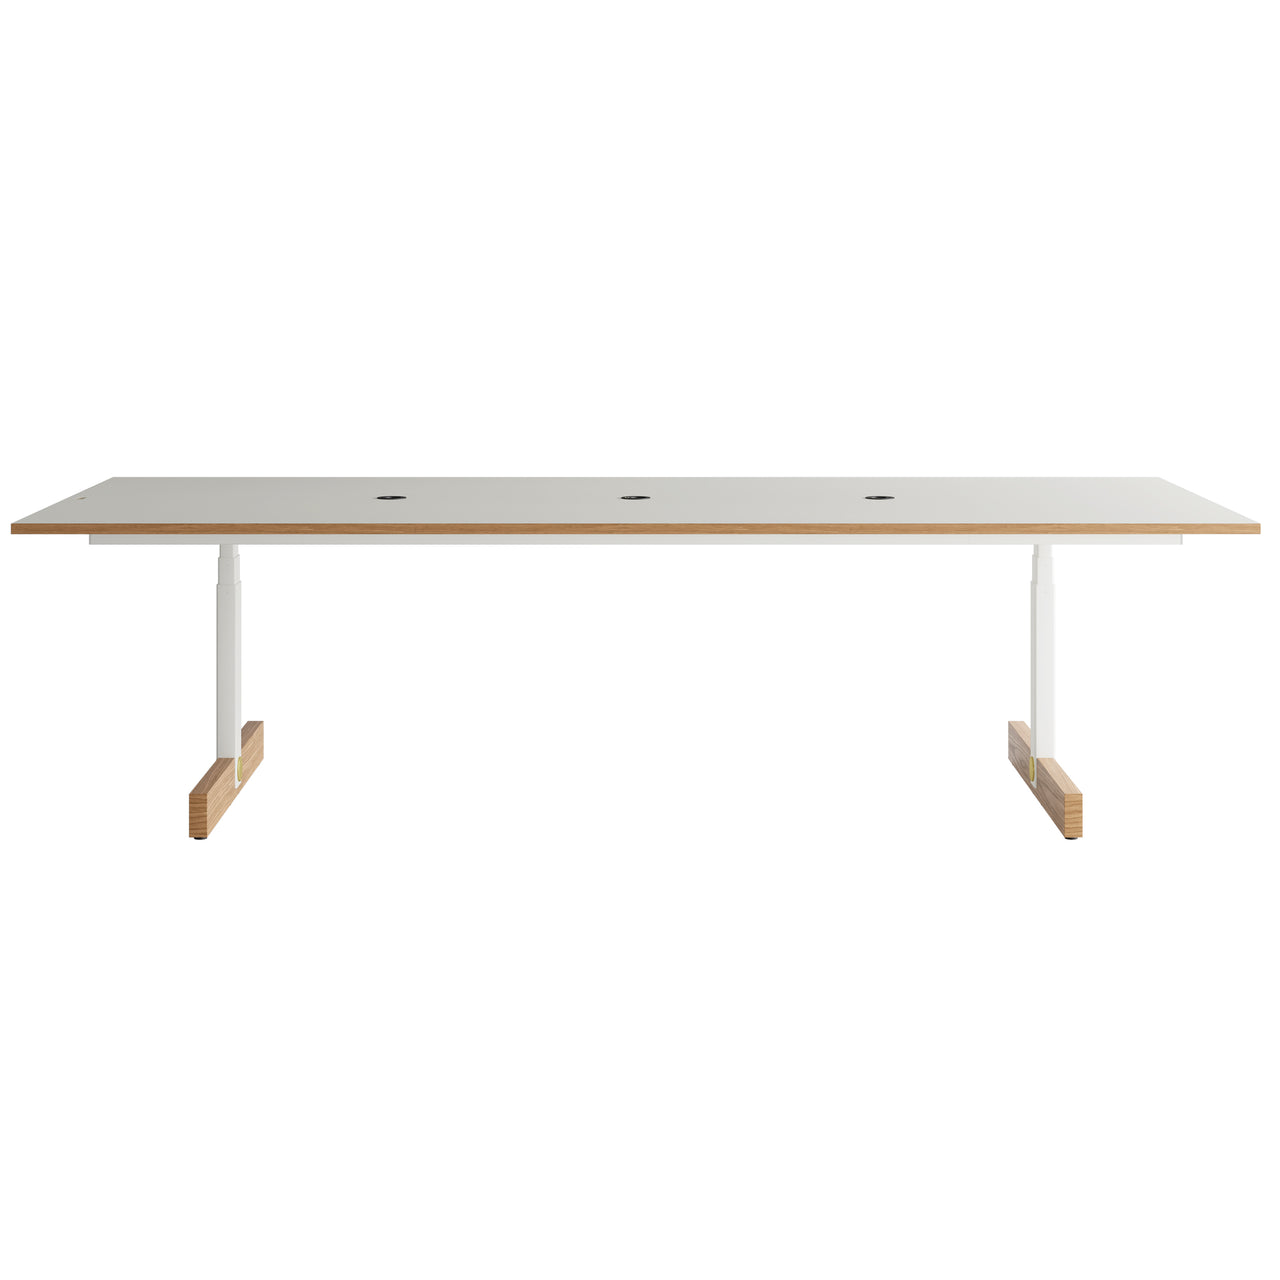 Coinz Height Adjustable Conference Table: Large - 47.2